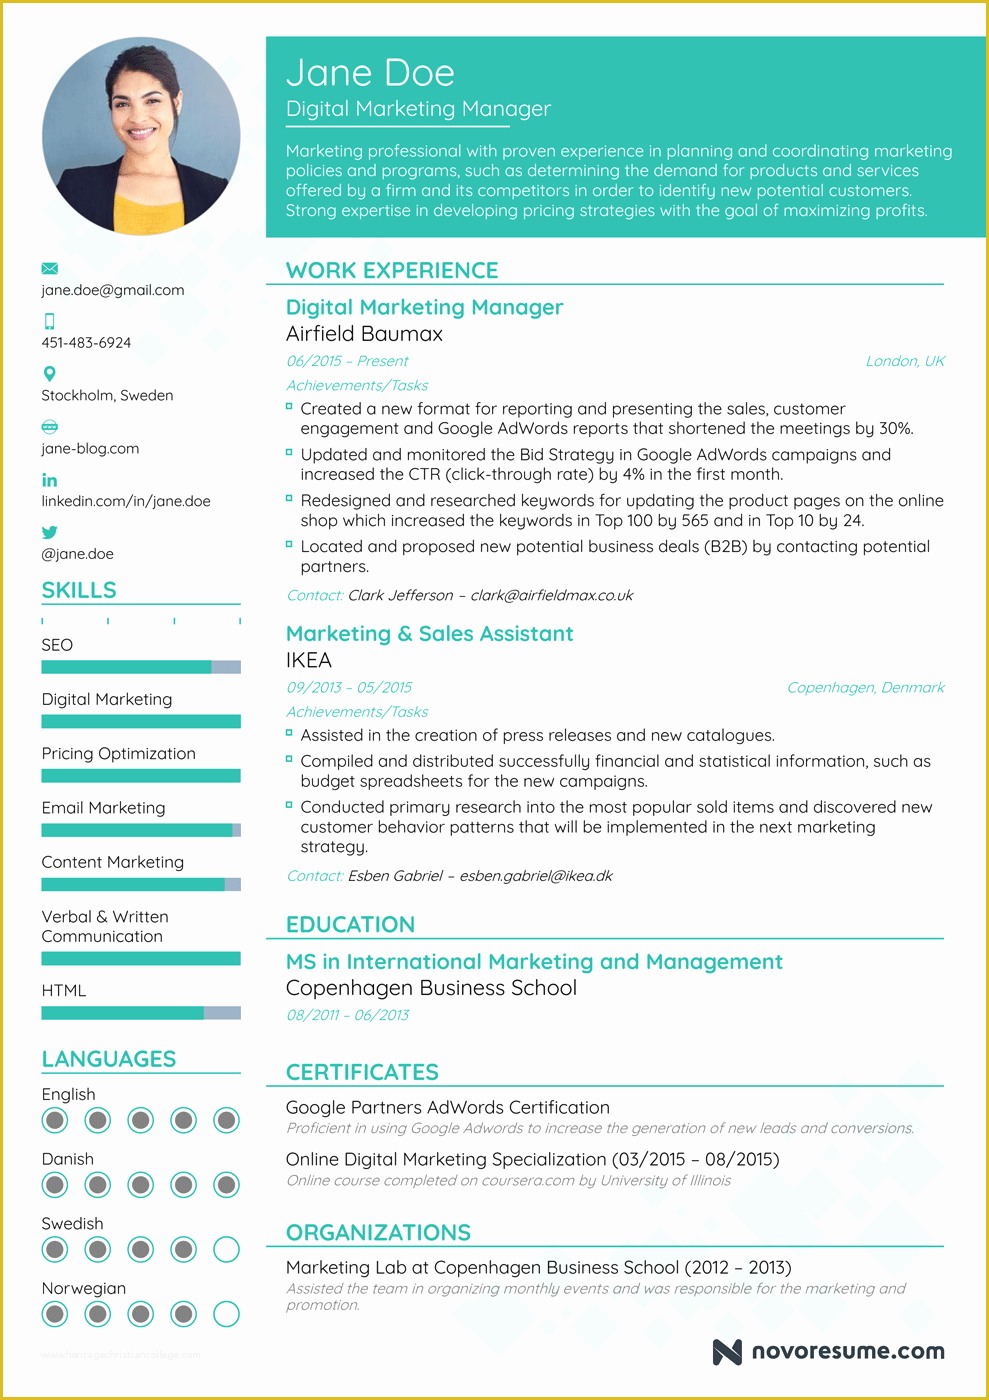 Free Business Resume Template 2018 Of How to Write A Resume In 2018 Guide for Beginner